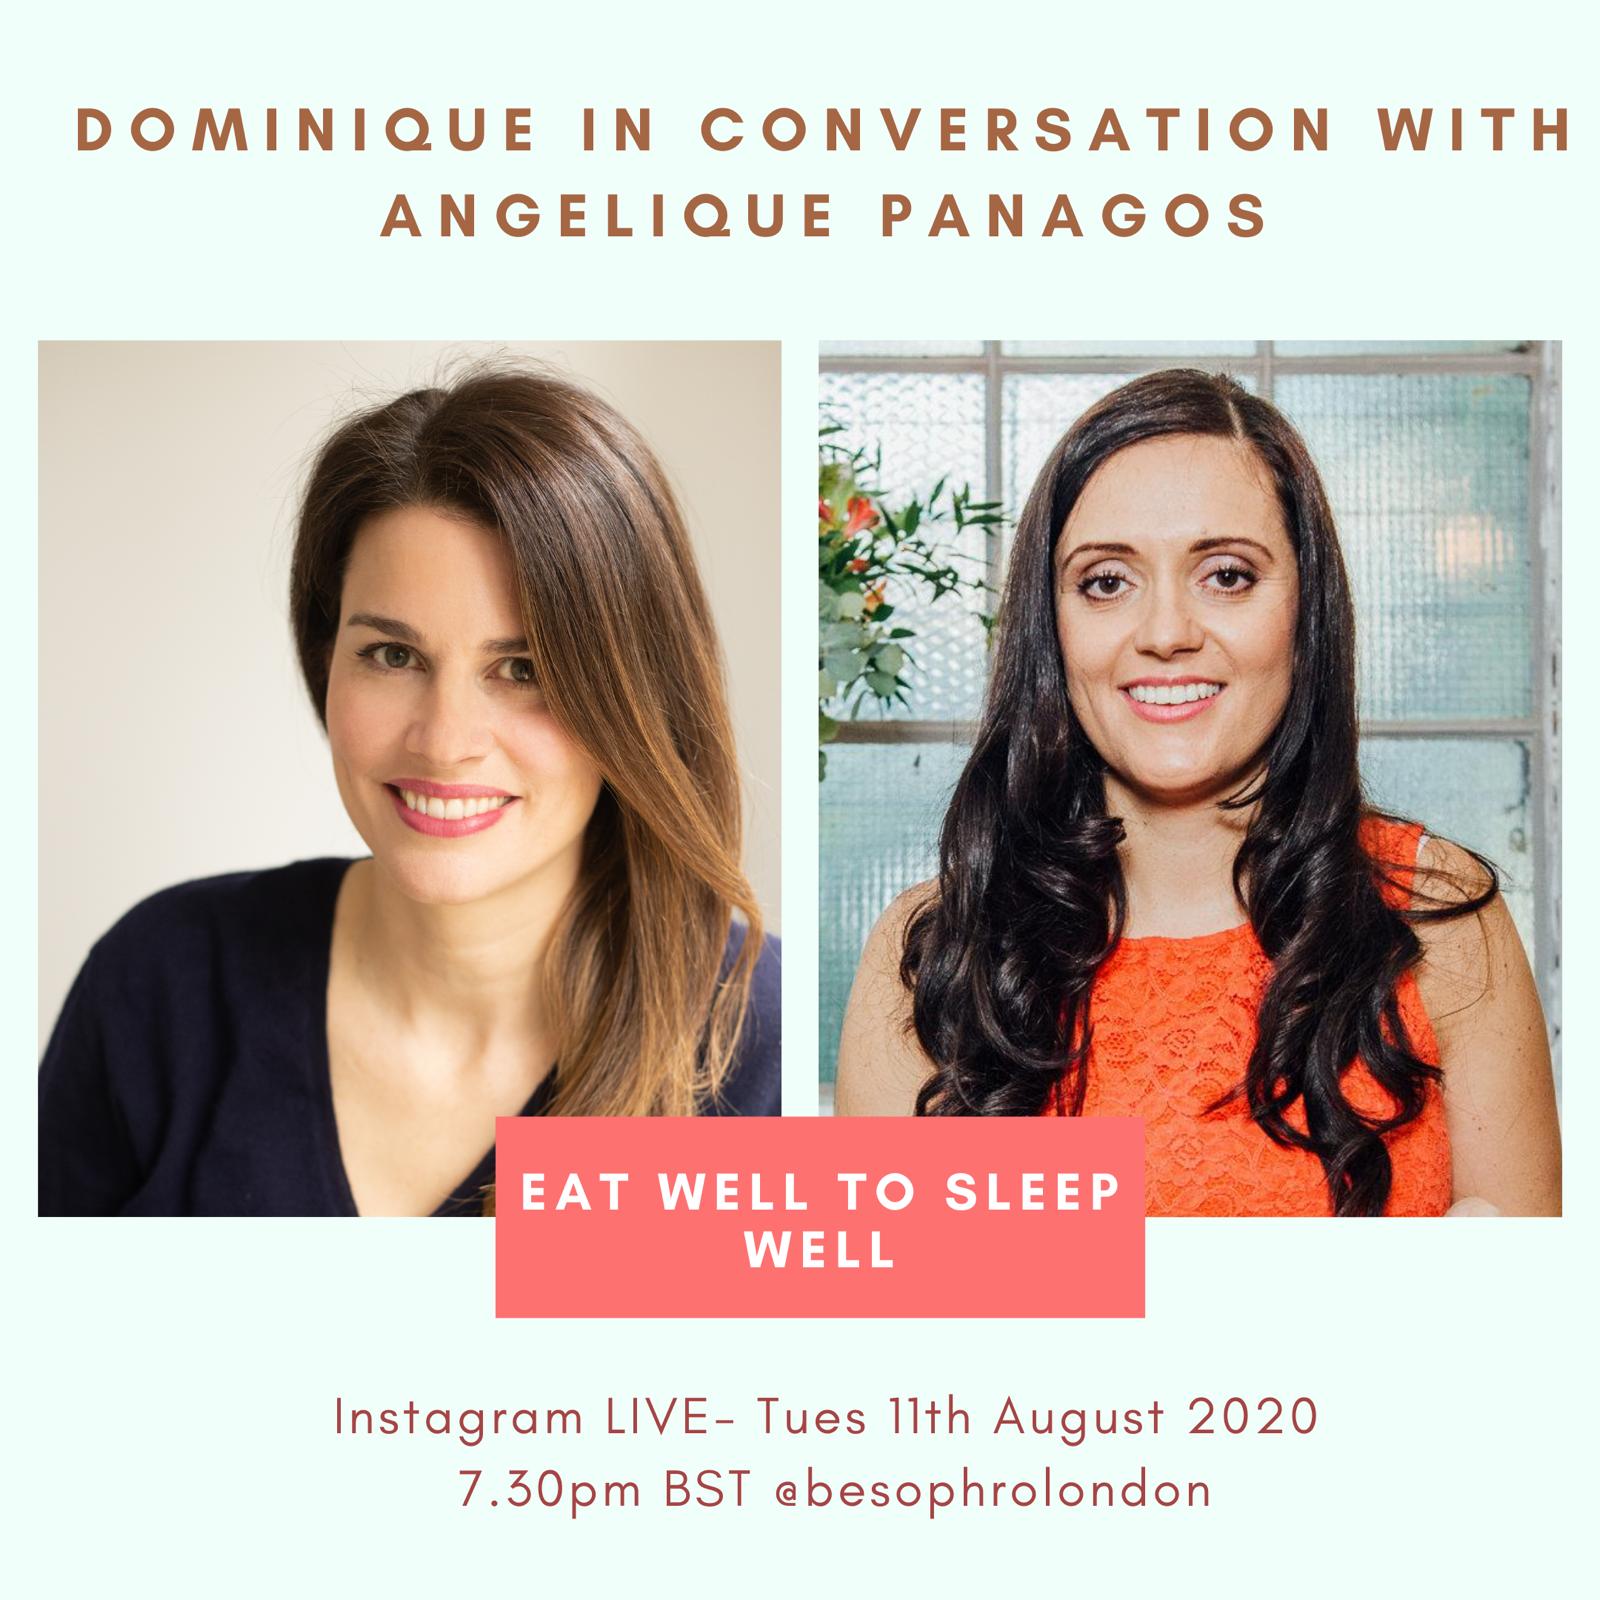 Dominique  In Conversation with Angelique Panagos “EAT WELL TO SLEEP WELL”